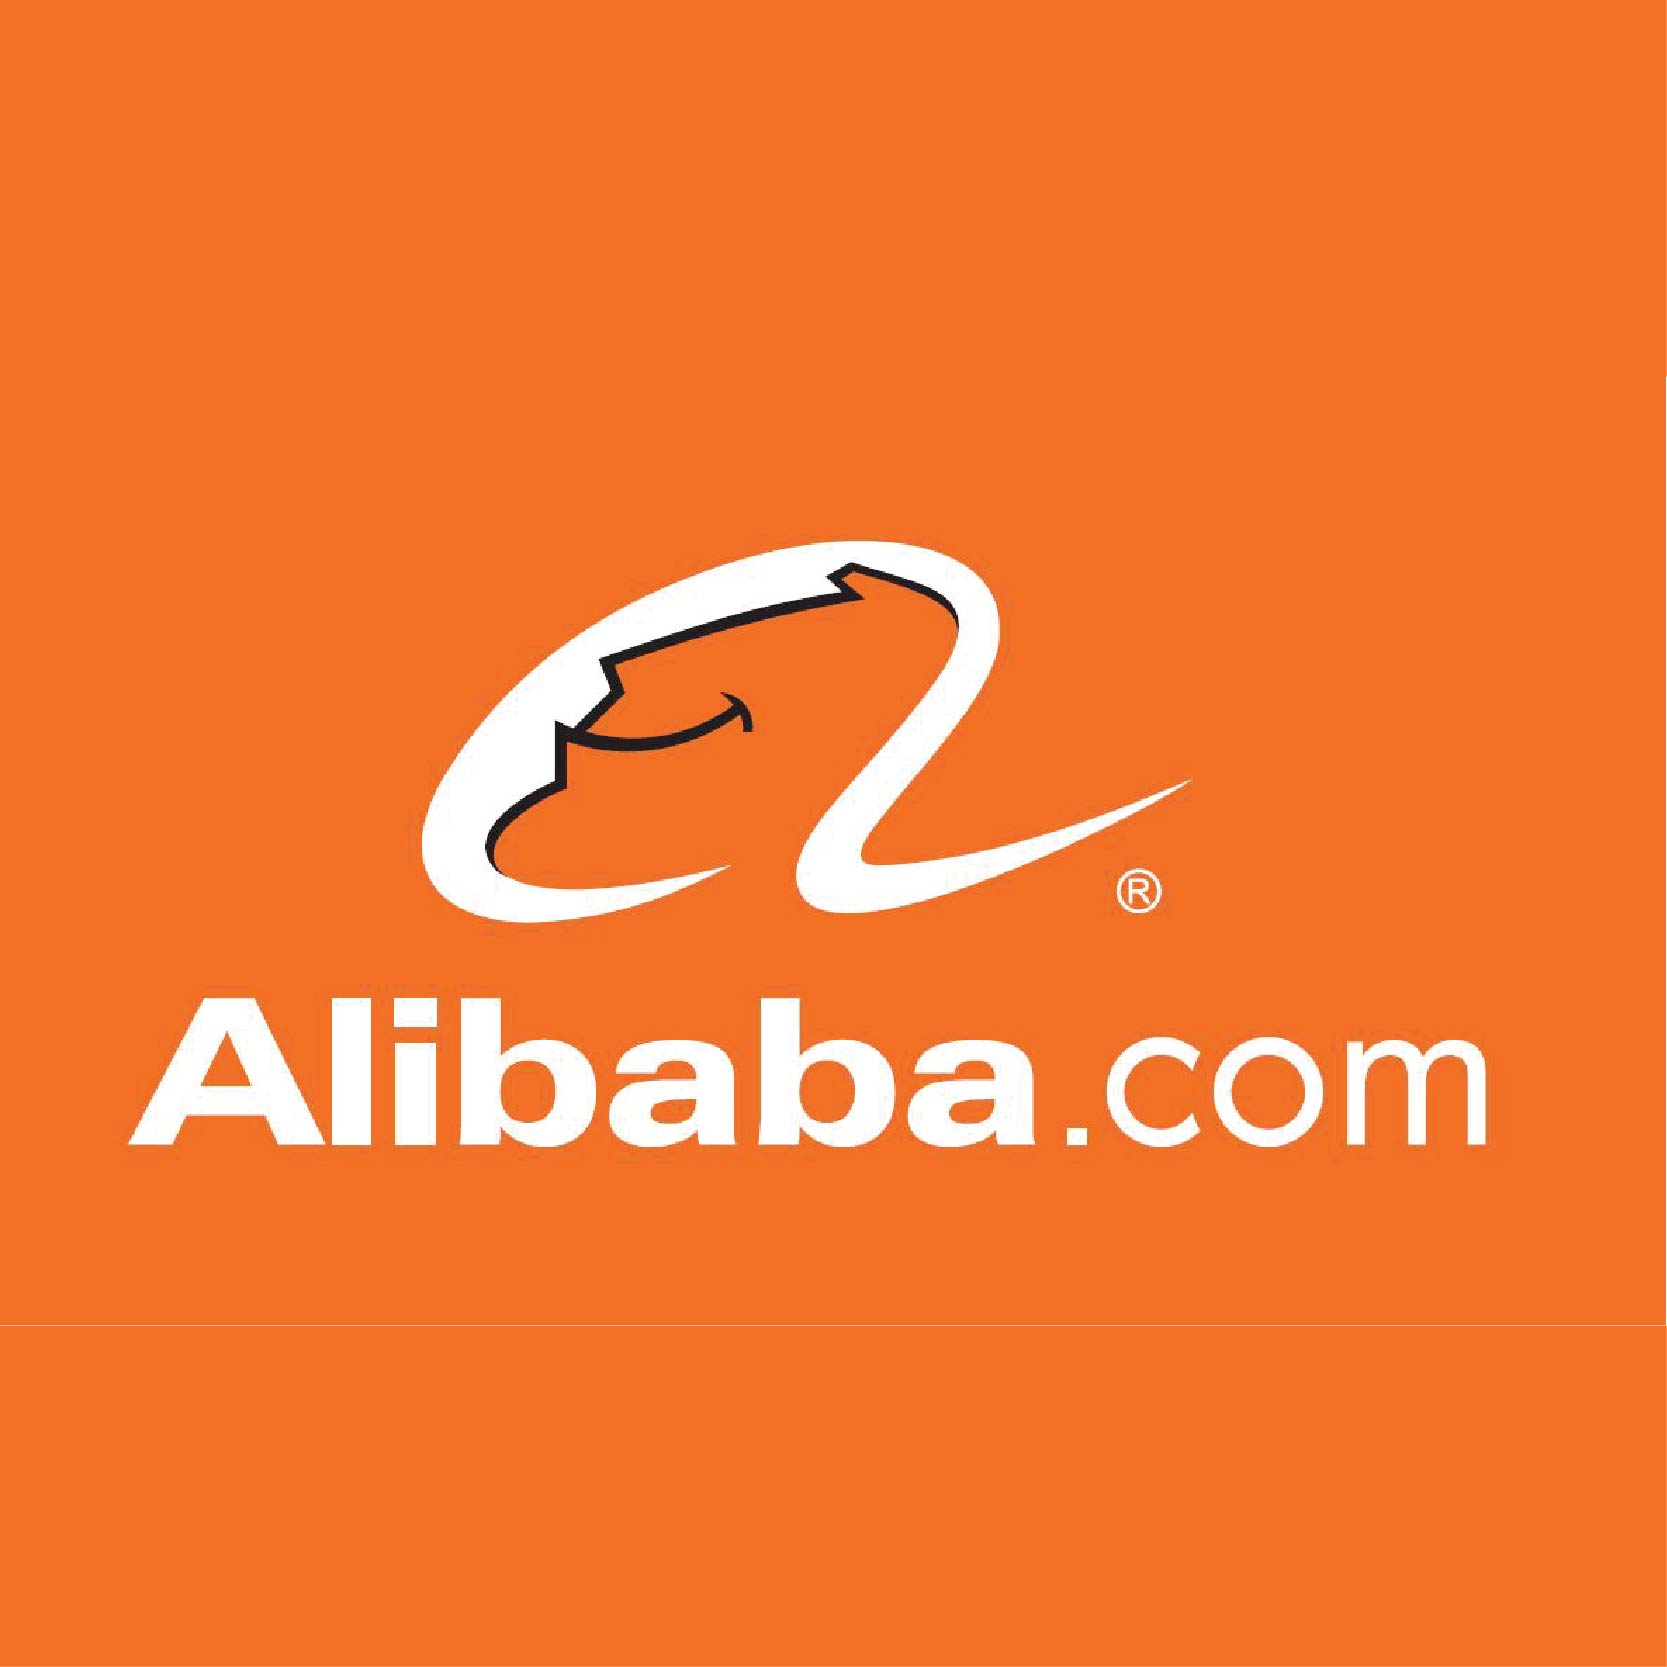 Congratulations To The Alibaba Platform For Successfully Closing Orders With Indian Customers